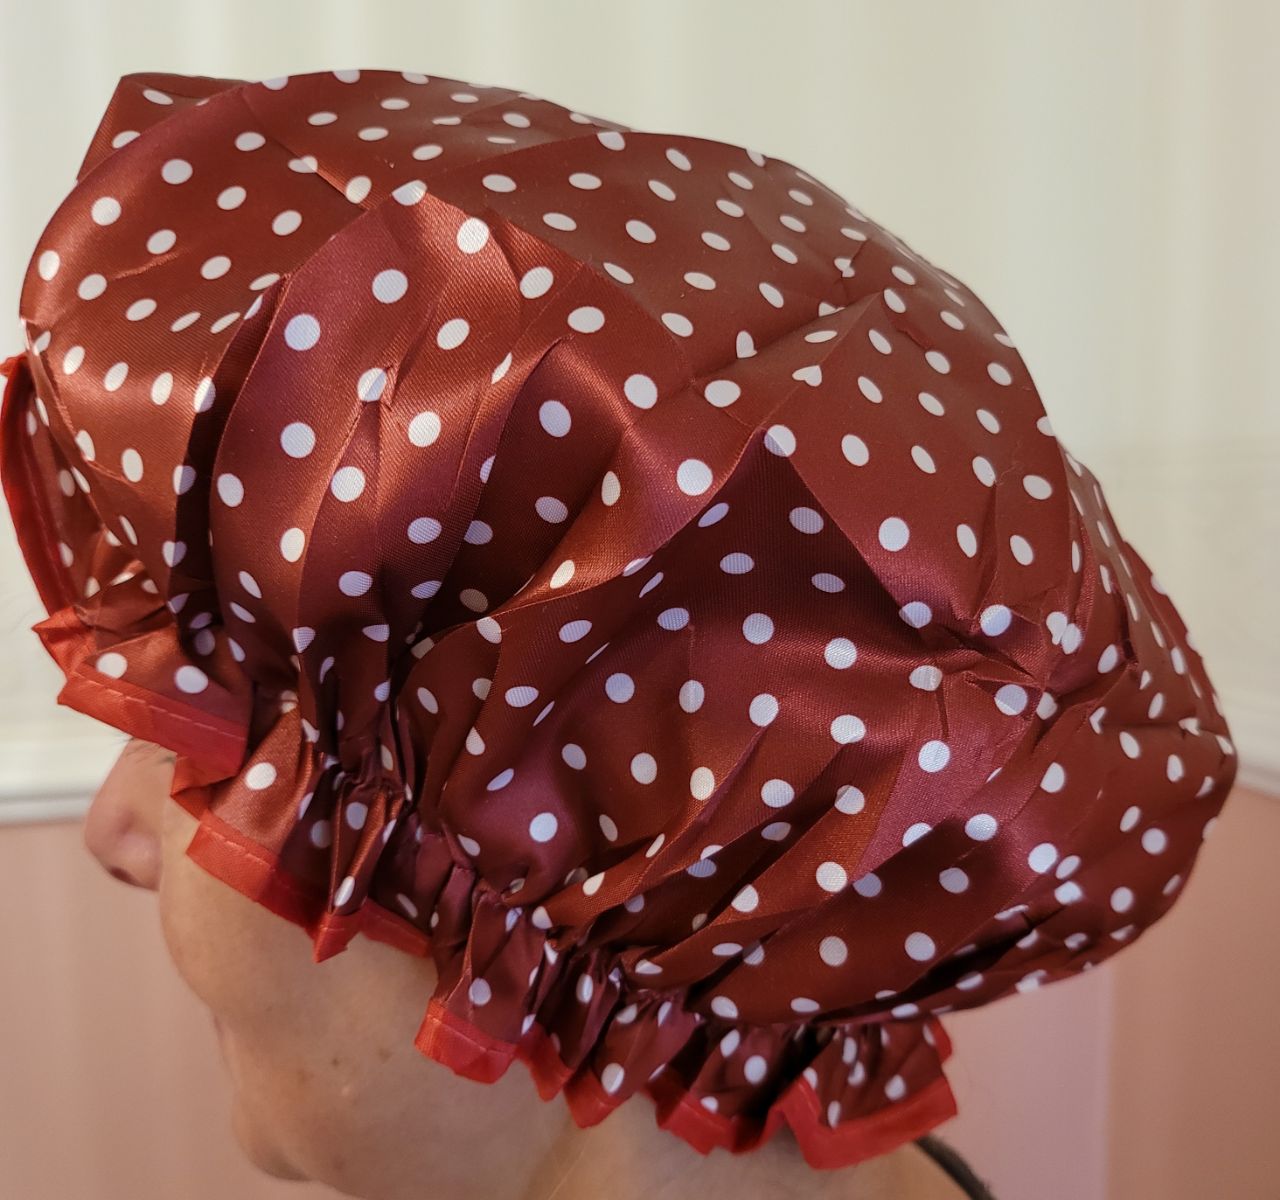 Extra large professional cap for herbal hair color &amp; plopping with the Curly Girl method | Model “Lucky Marie”